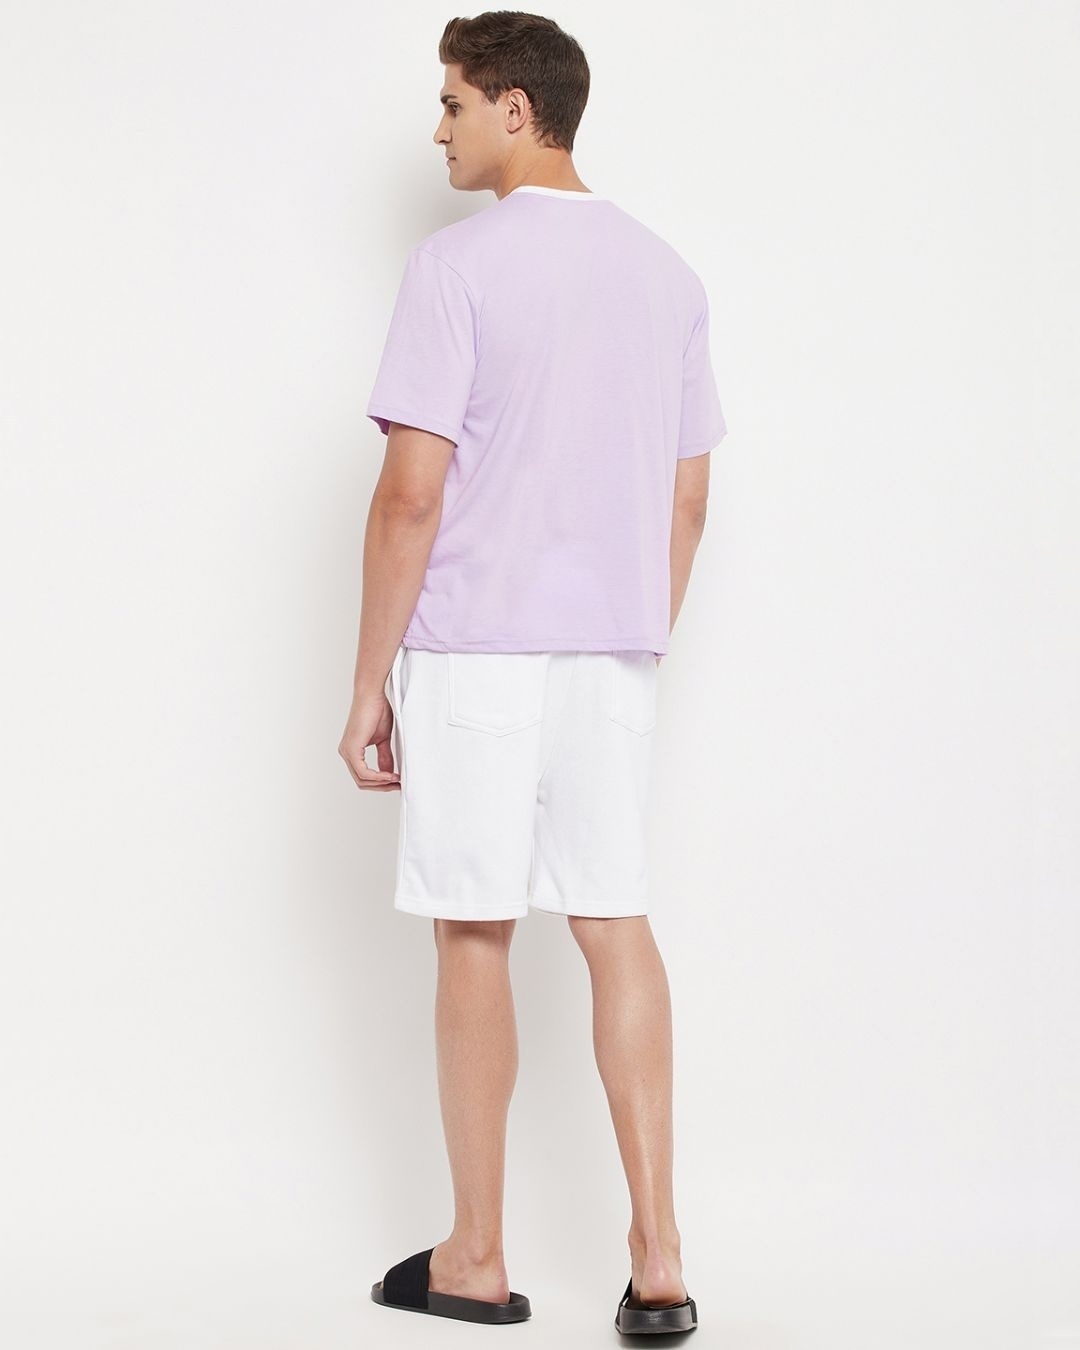 Shop Men's Purple & White See Good in All Things Typography Oversized T-shirt & Shorts Set-Design